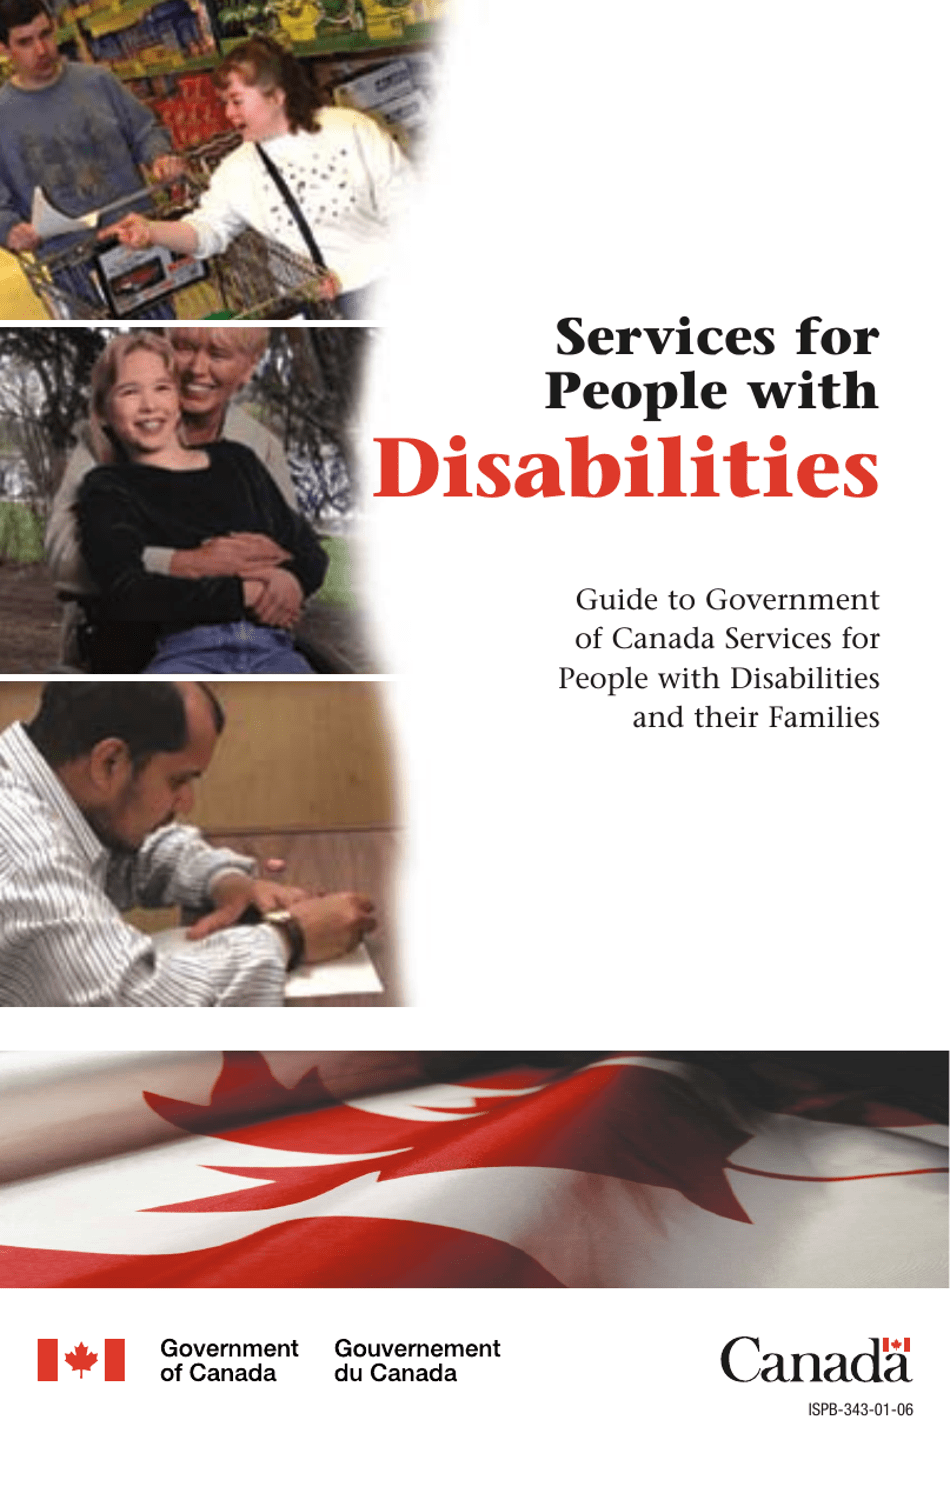 Services for People With Disabilities guide - Image Preview